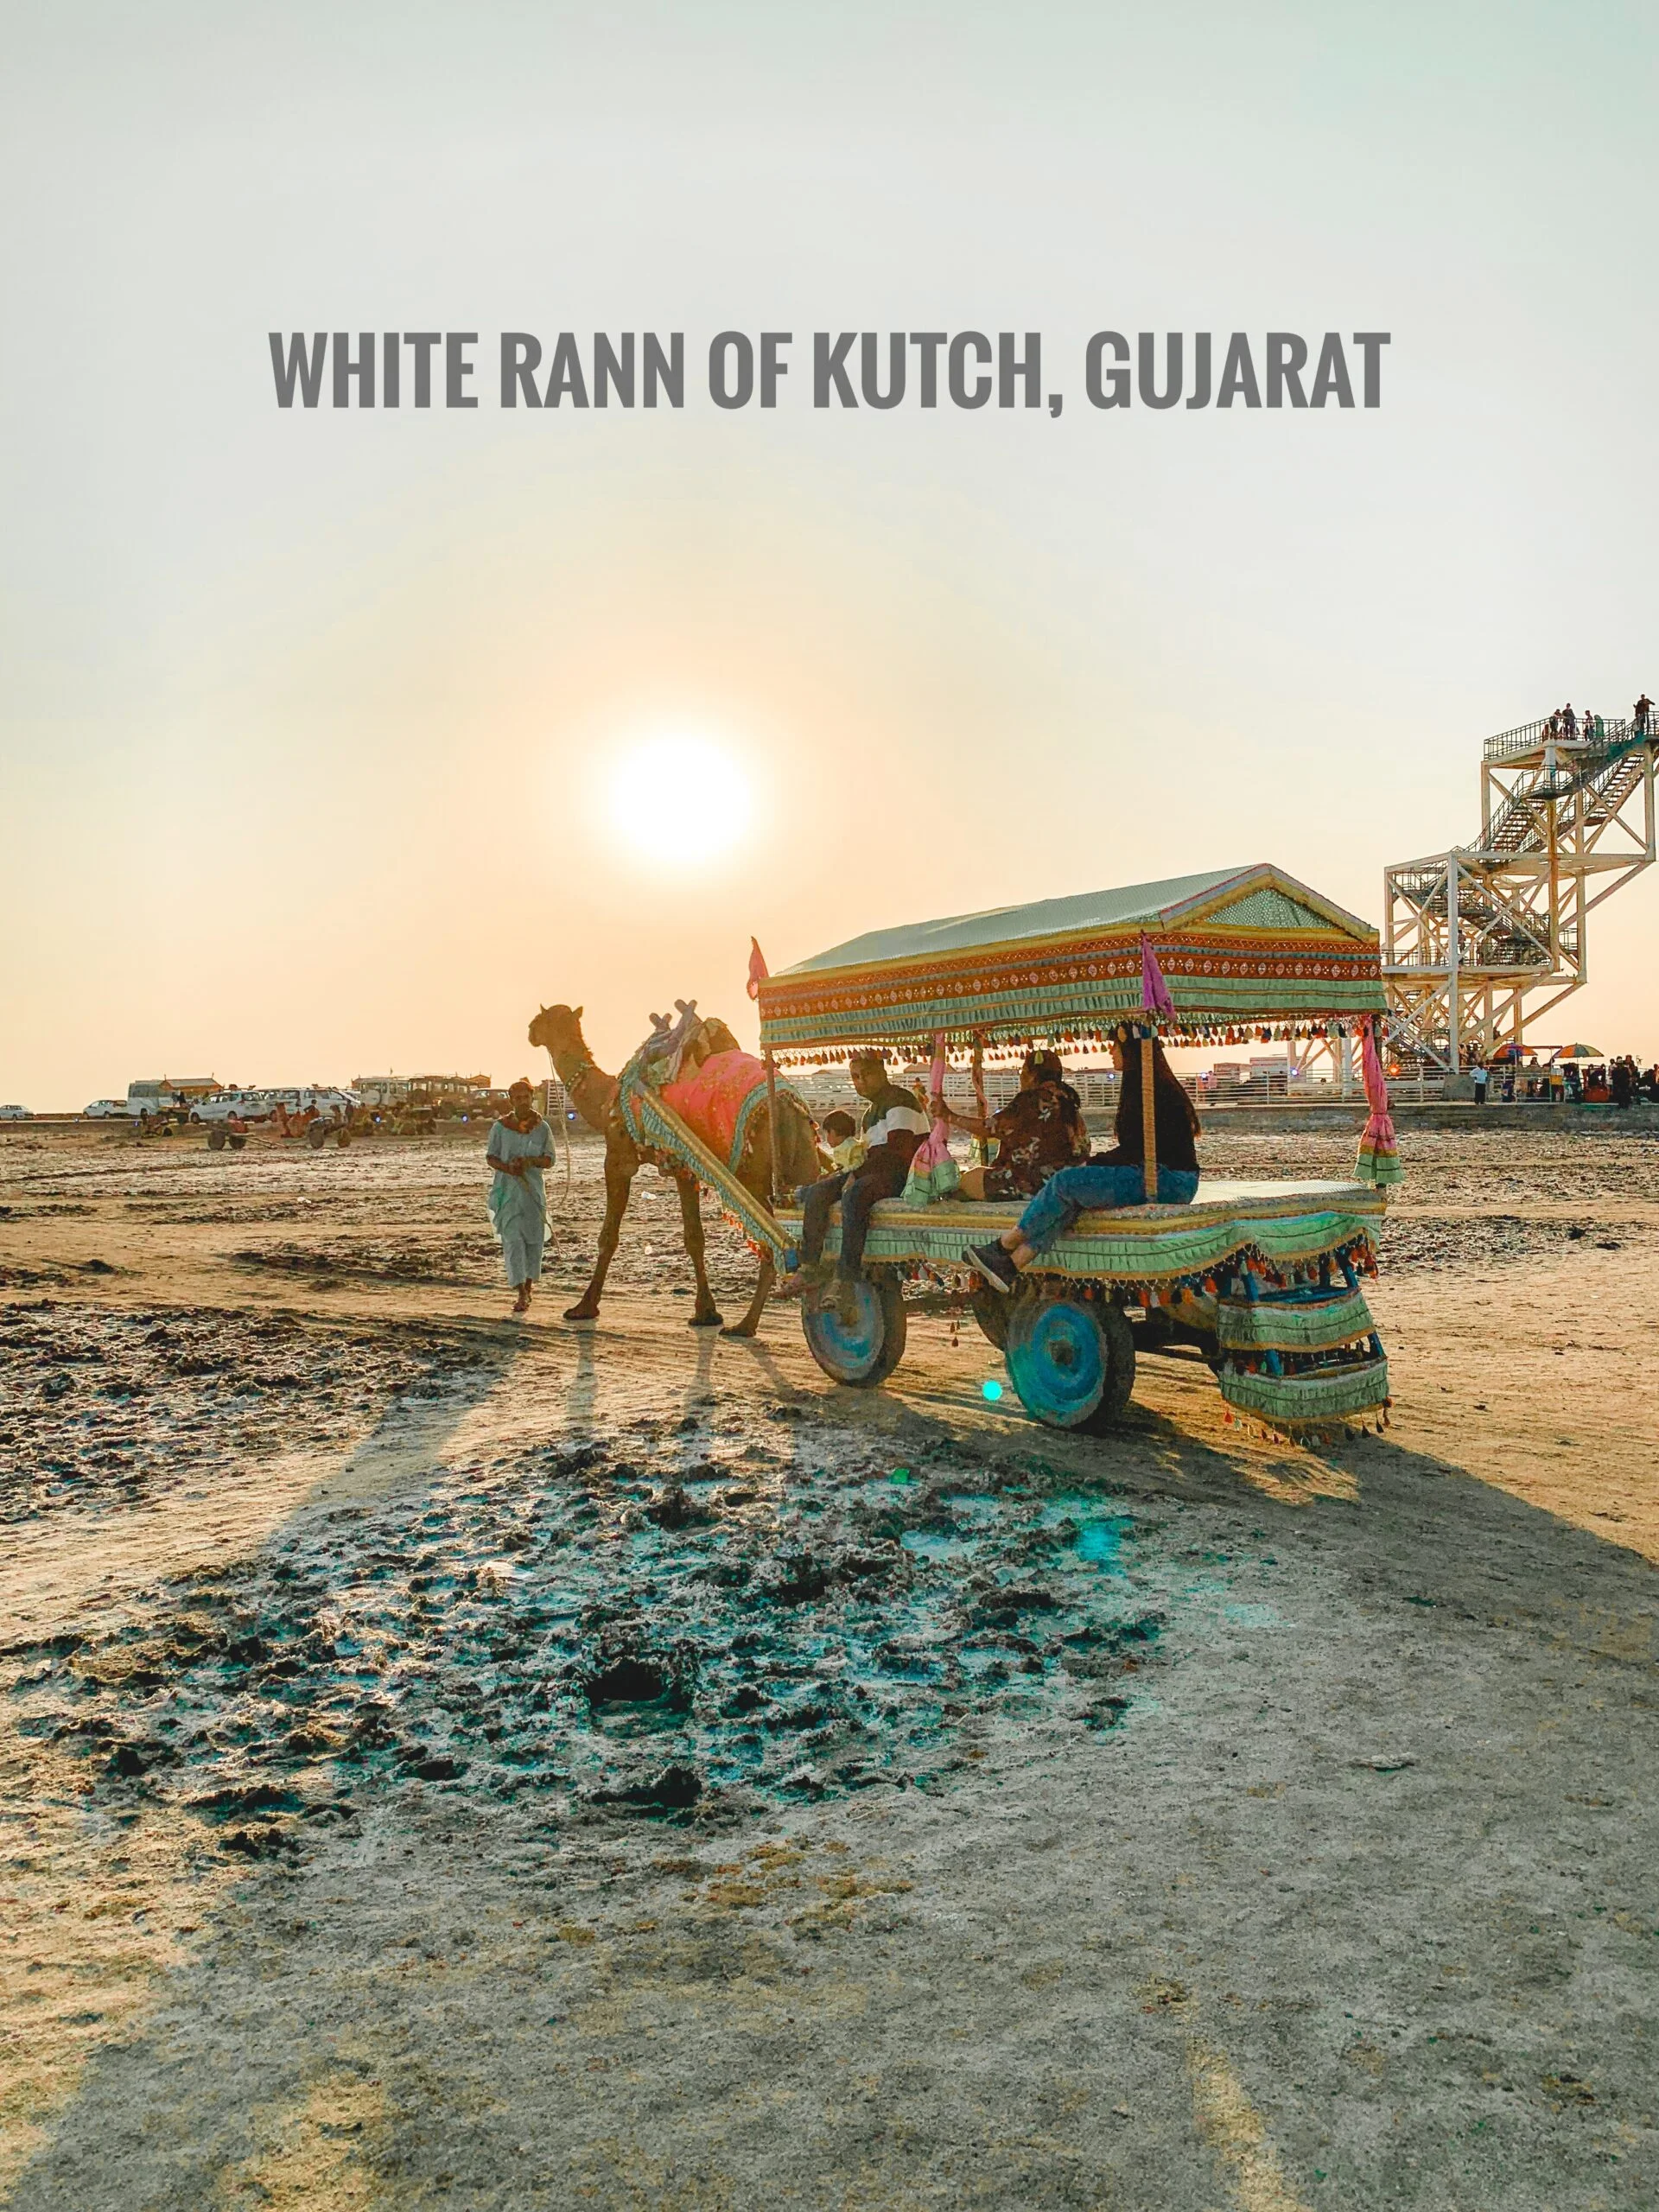 How to Visit Great Rann of Kutch: Essential Travel Guide